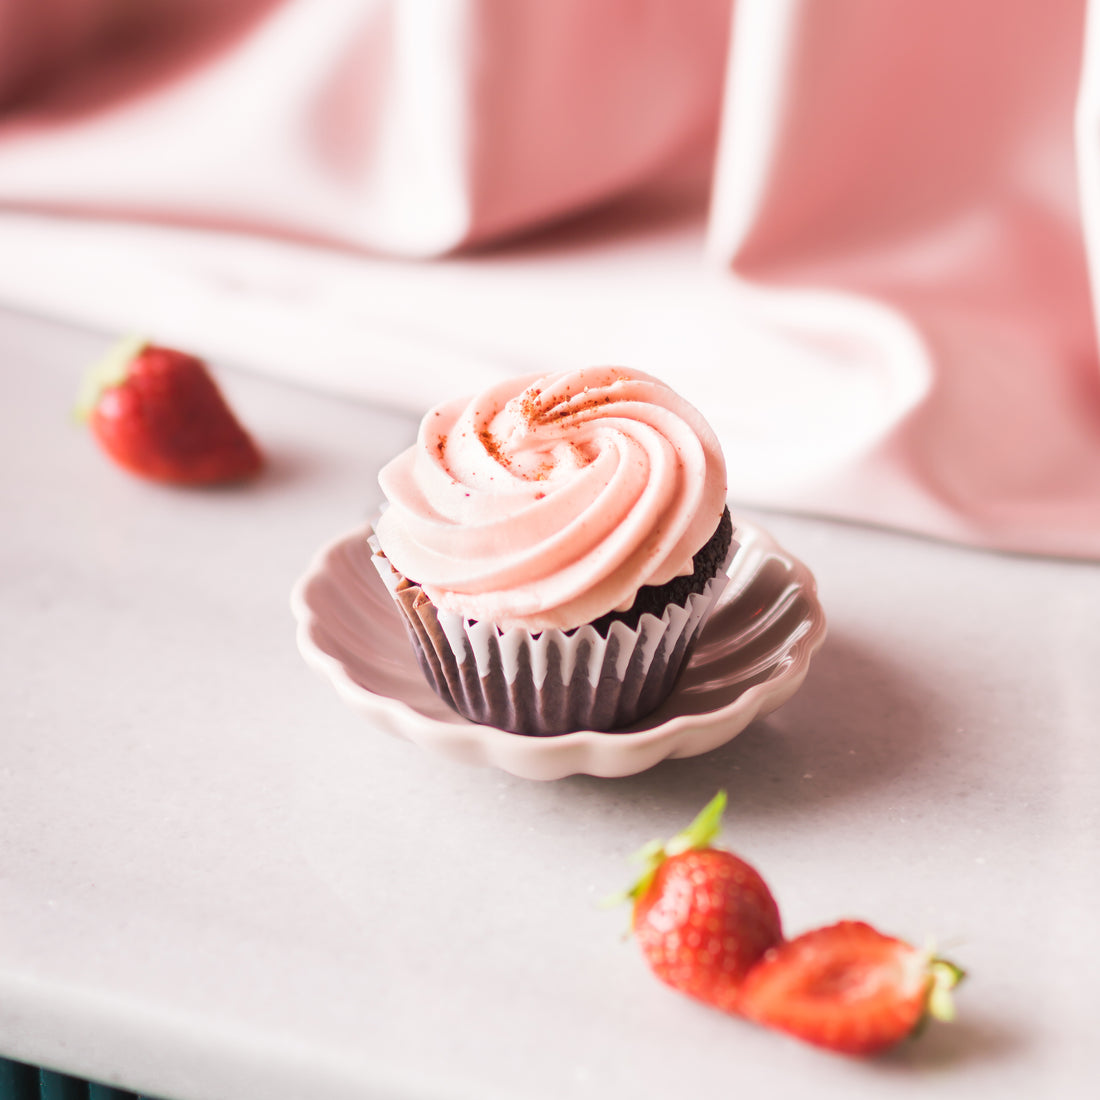 Savor the sweet taste of summer with a scrumptious strawberry cupcake, topped with creamy frosting and a juicy strawberry. Pair it perfectly with a crisp and refreshing Brut Cava, with its bright fruit notes that complement the cupcake&